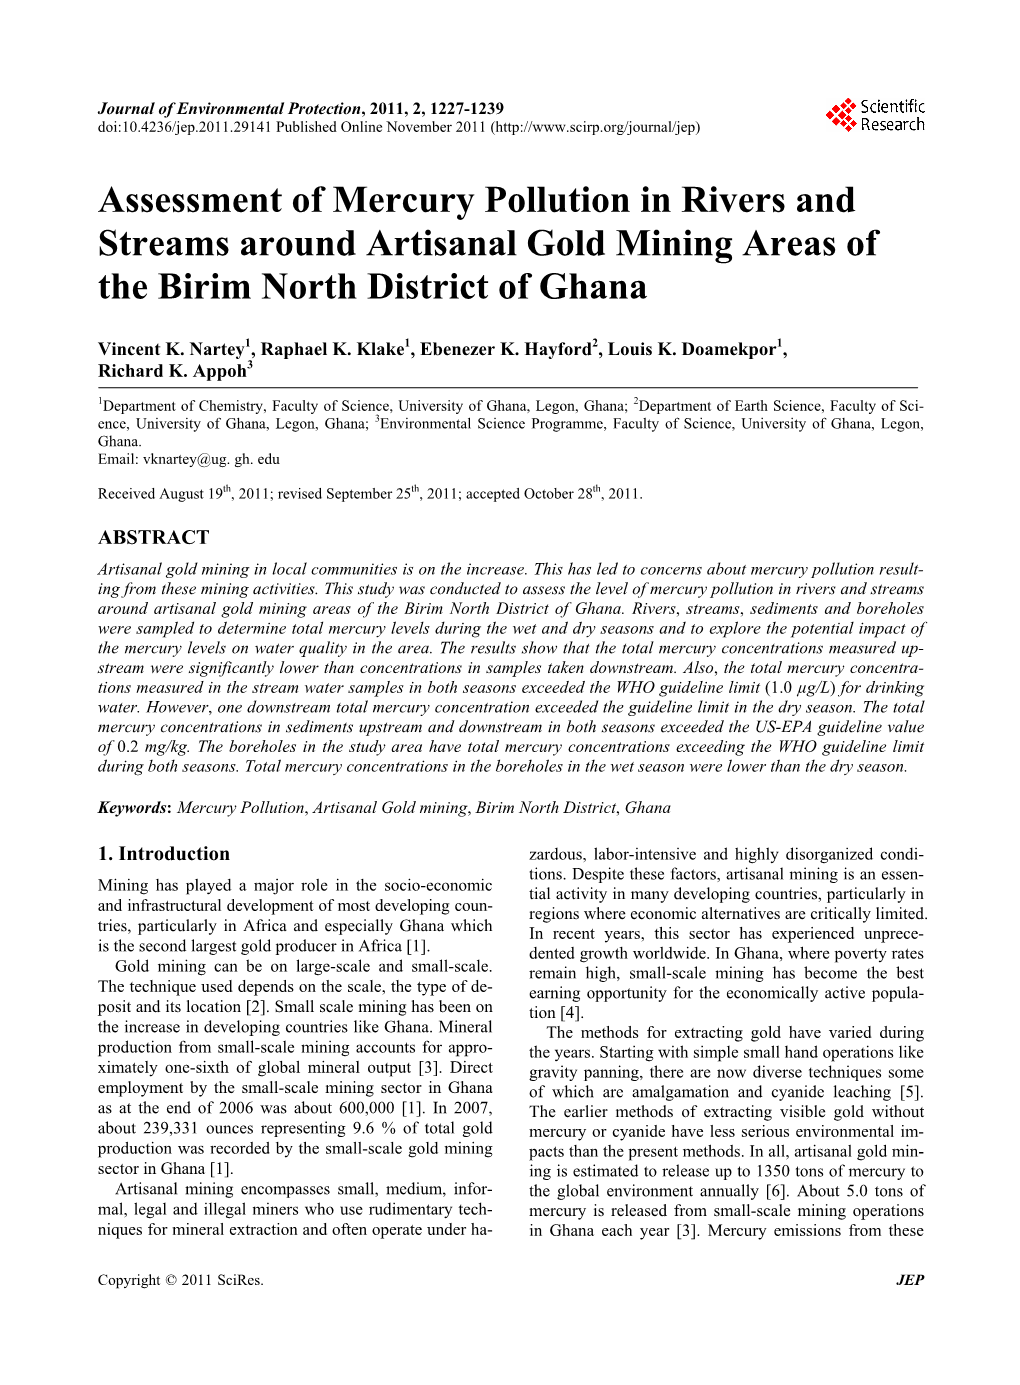 Assessment of Mercury Pollution in Rivers and Streams Around Artisanal Gold Mining Areas of the Birim North District of Ghana